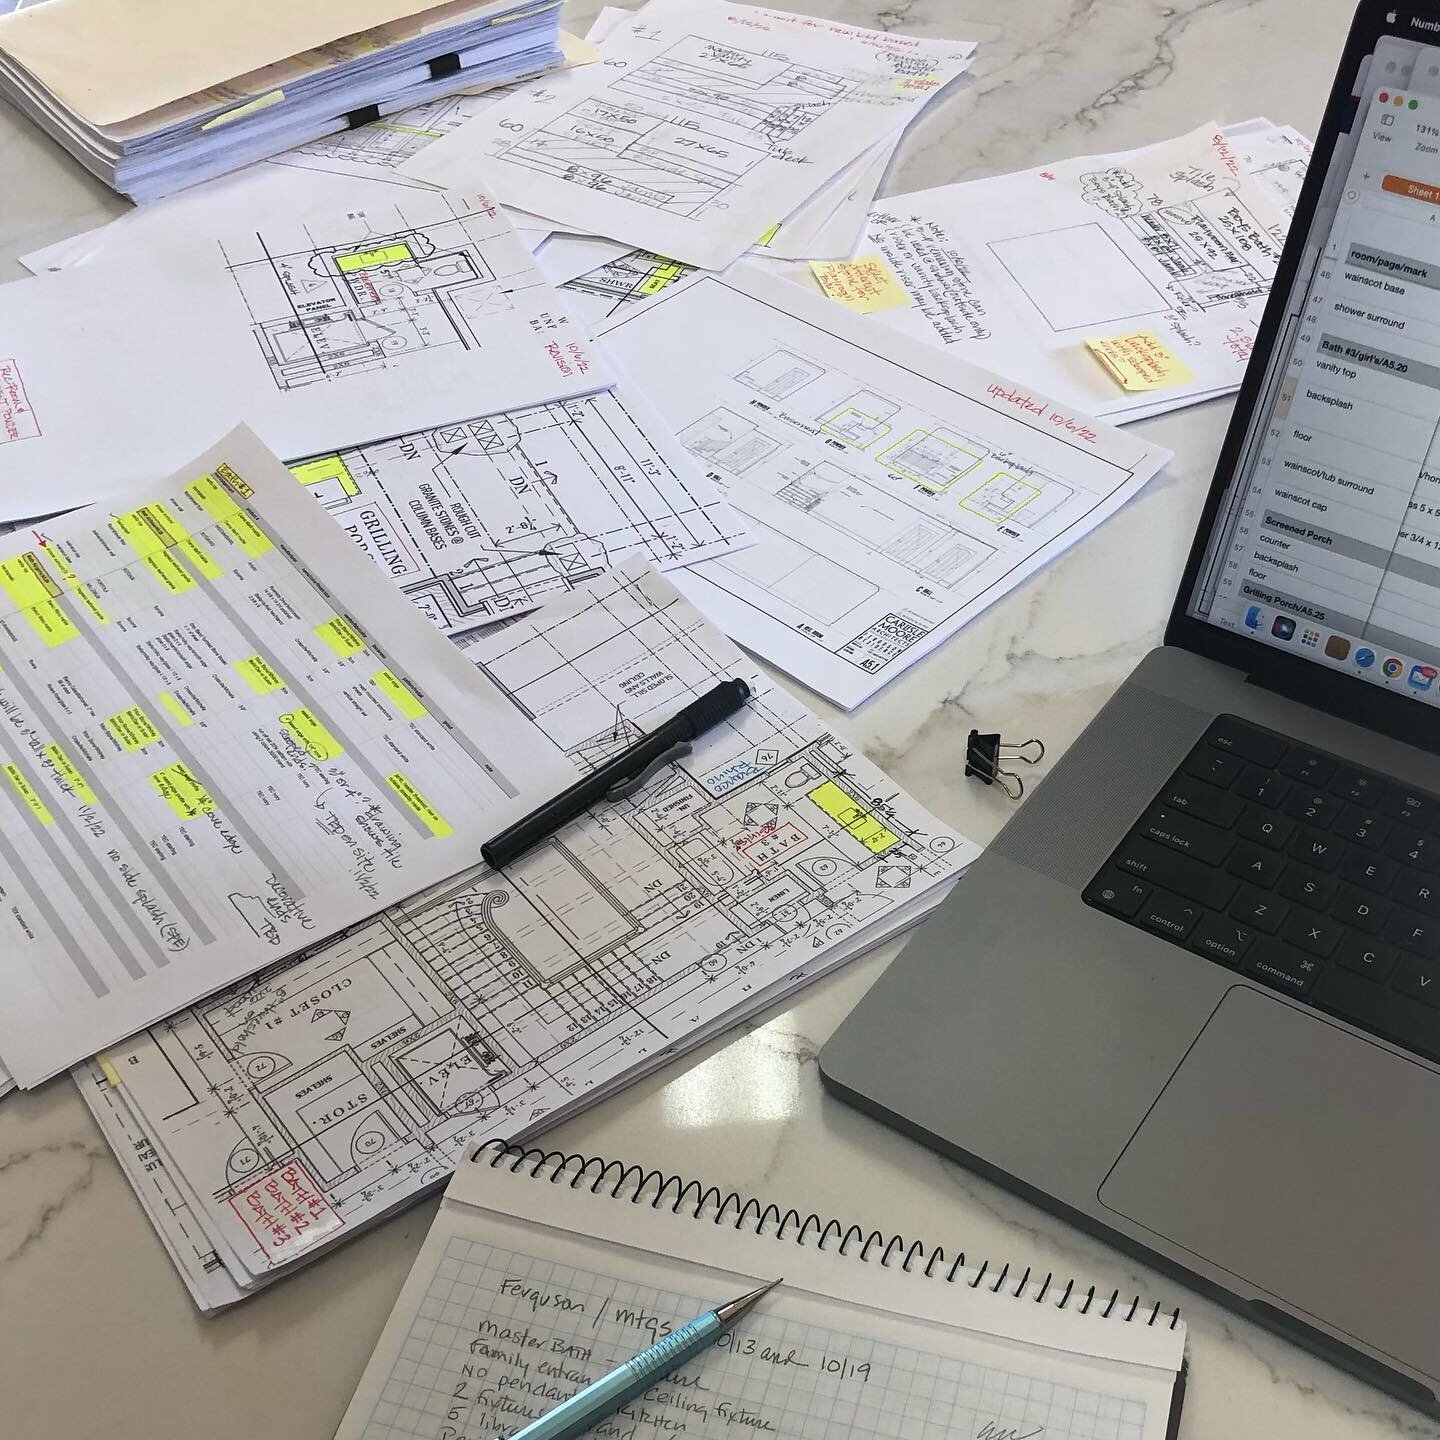 Lots of drawing, highlighting and spreadsheet work going on this morning to make sure all stone details are noted for our Shoal Creek project ✏️ 🏠🛠 

#interiordesign #designdetails #tileandstone #renovation #detailsmatter